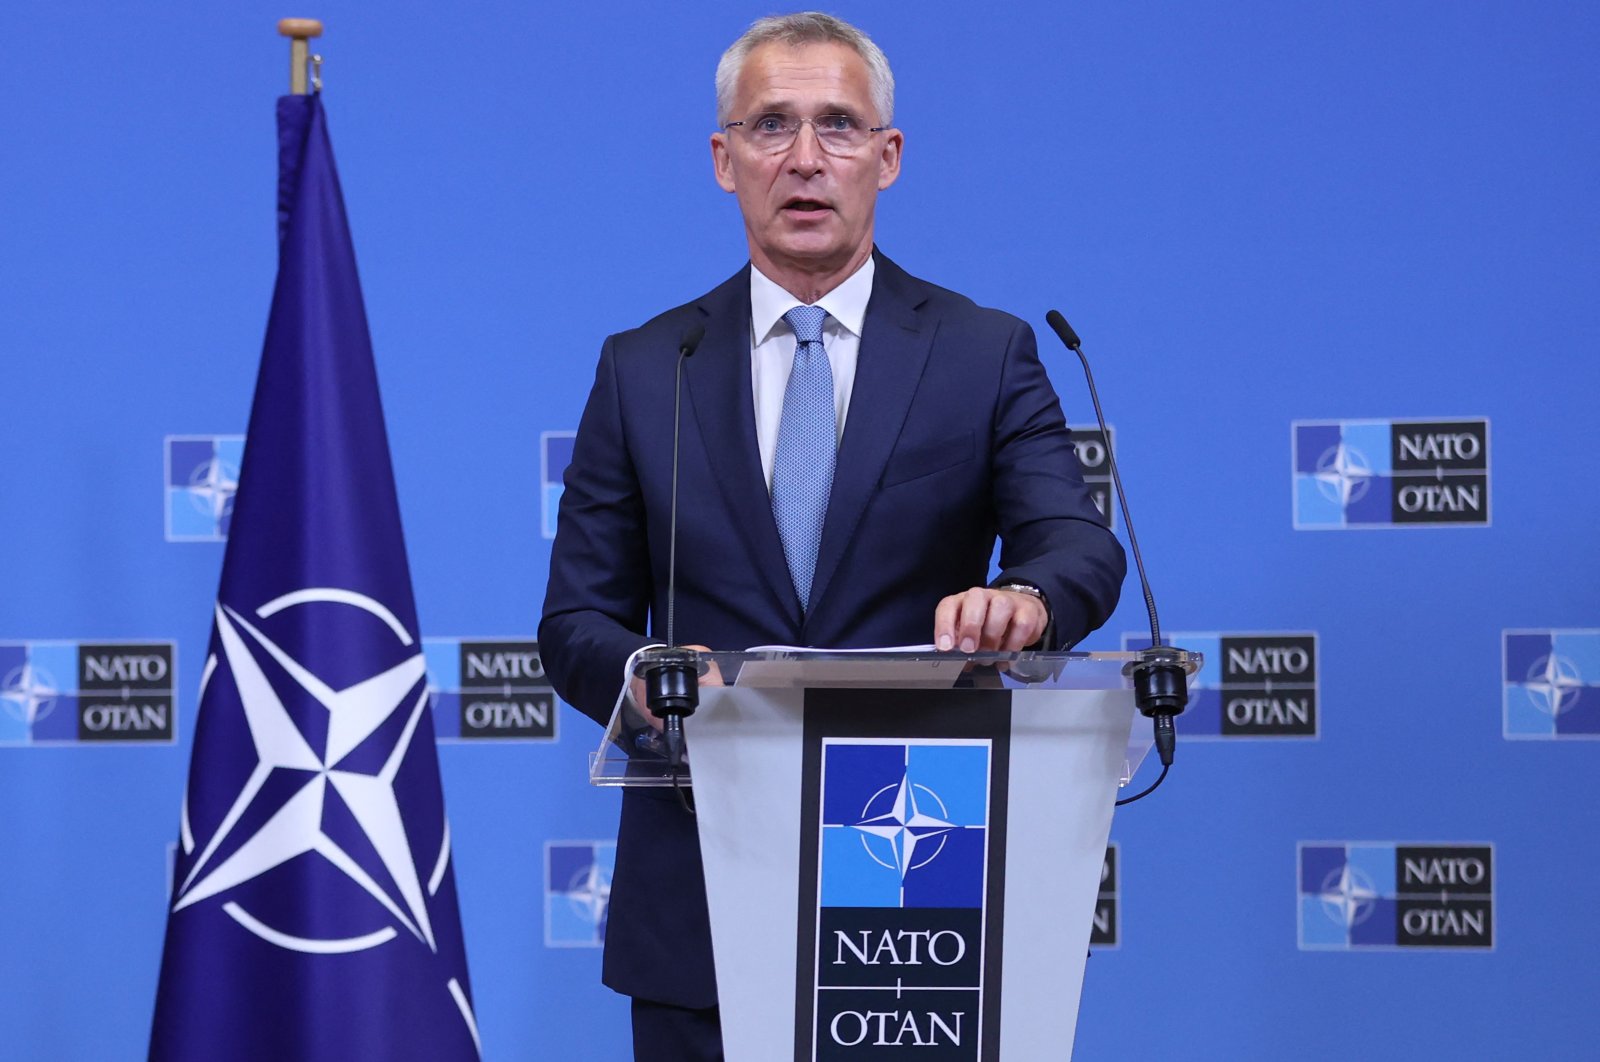 NATO Secretary-General Jens Stoltenberg holds a press conference at the NATO headquarters in Brussels, Belgium, Aug. 17, 2022. (AFP Photo)